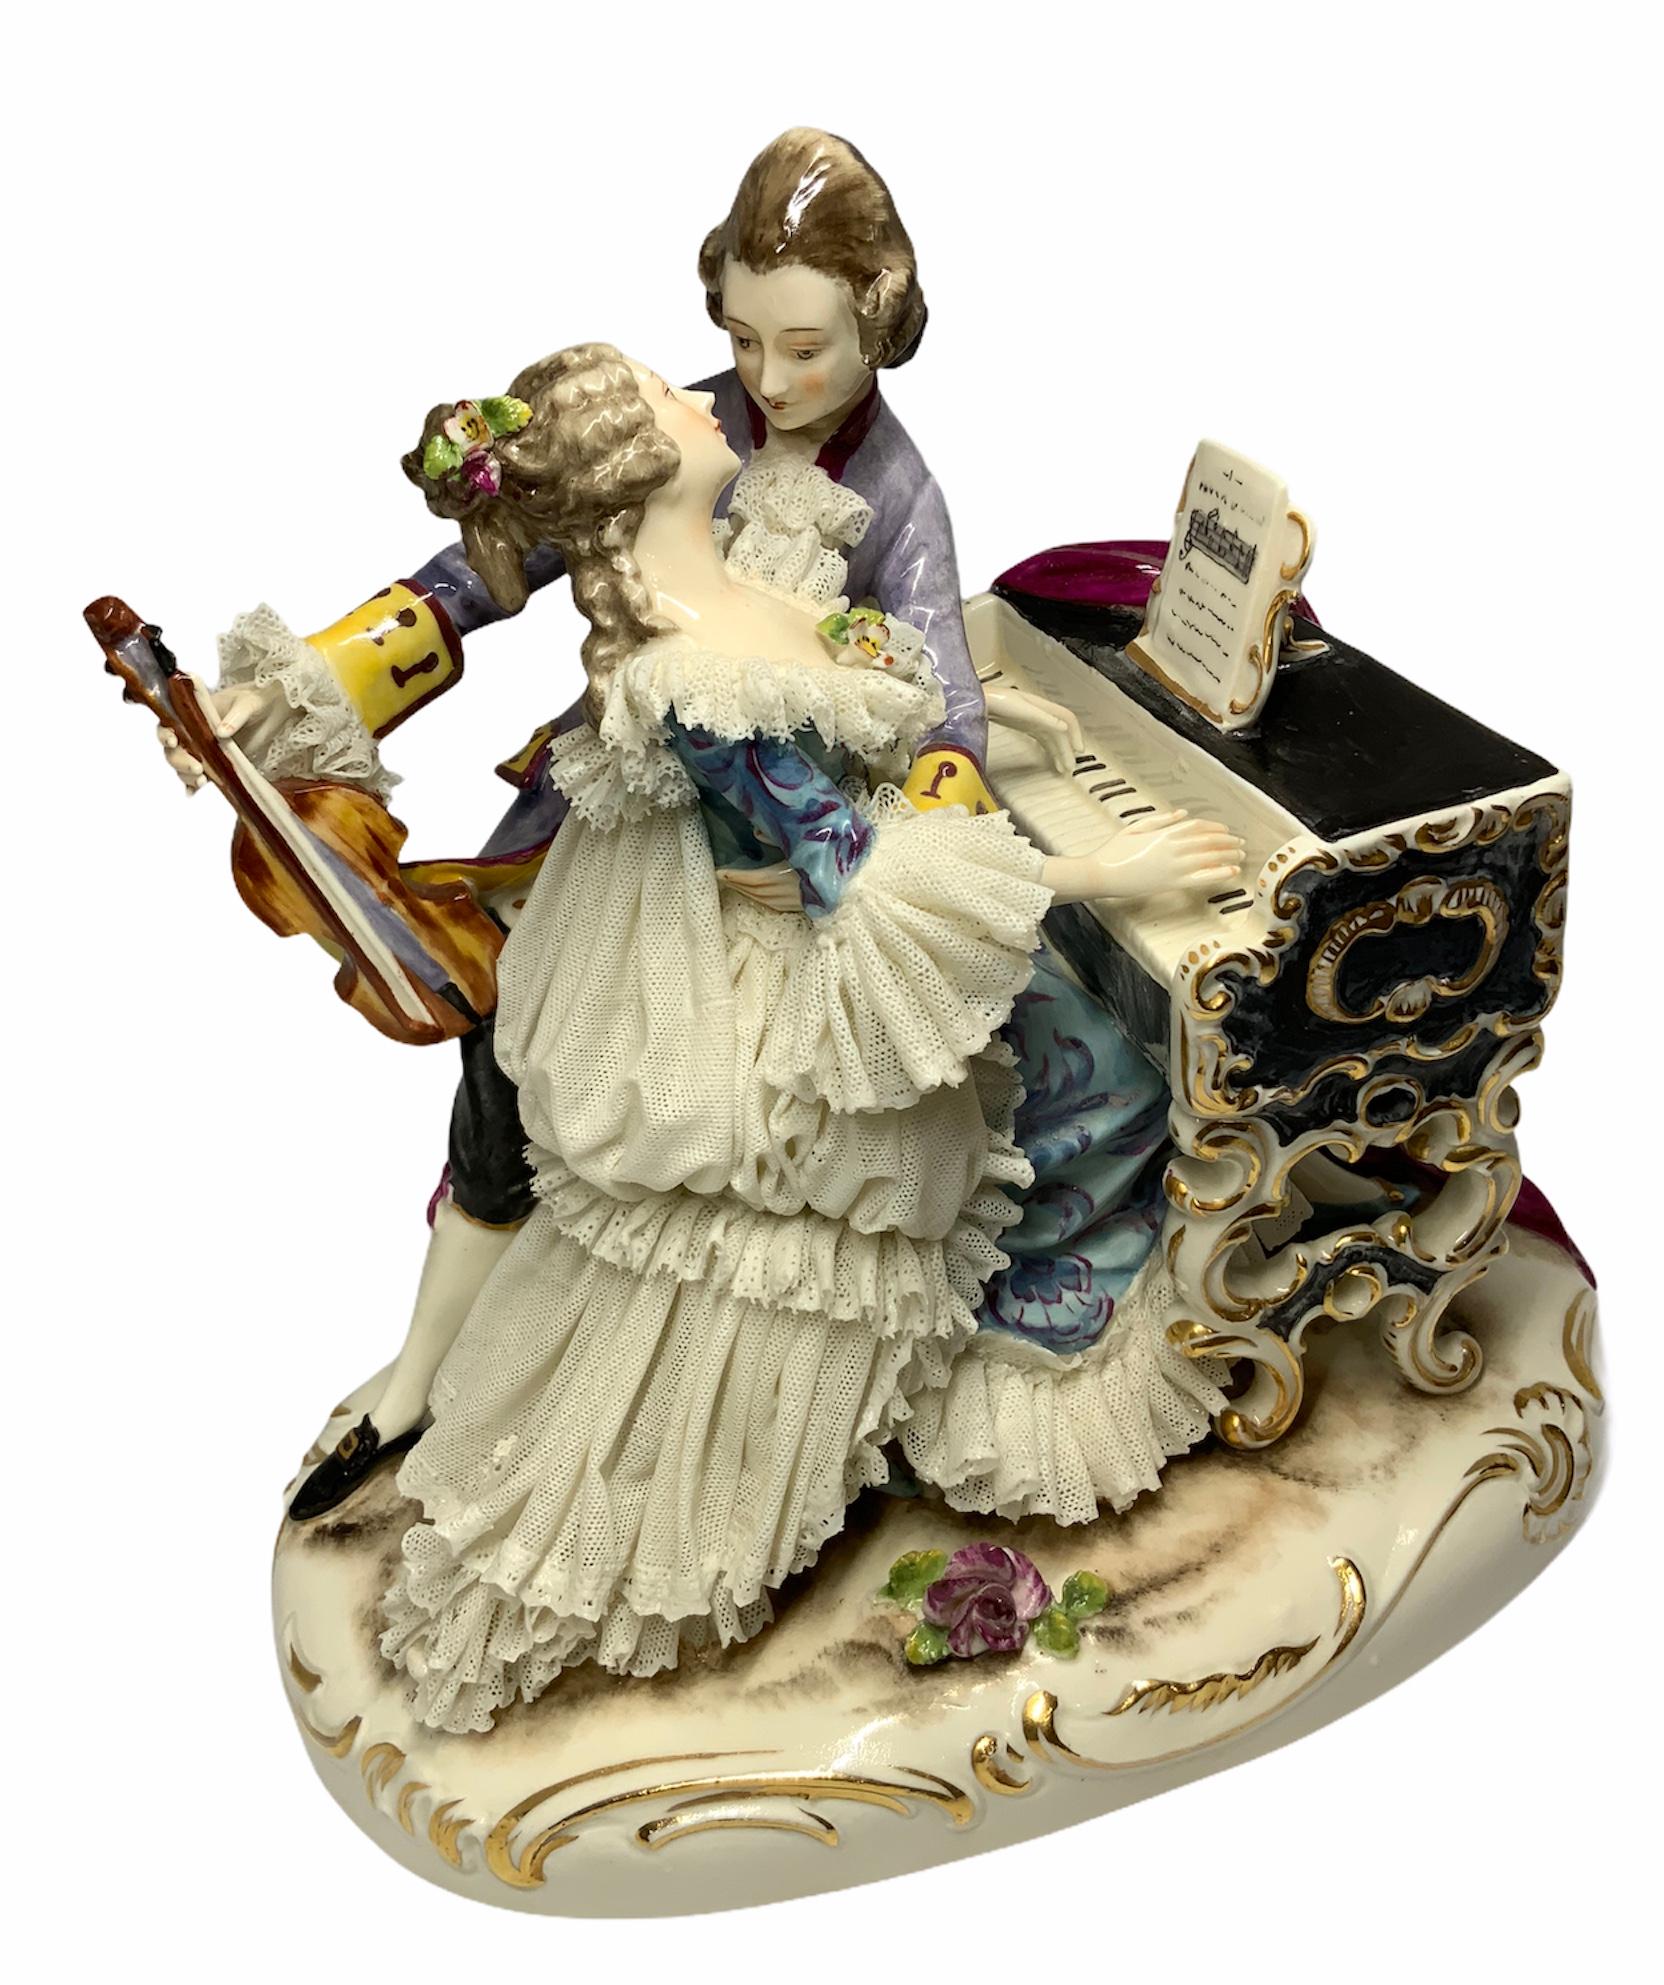 This is a Dresden Porcelain depicting a couple of musicians in love. She is playing the Louis XV style small black piano while he is holding the violin with his right hand and embracing her with the left arm, almost ready to kiss her. Both of them